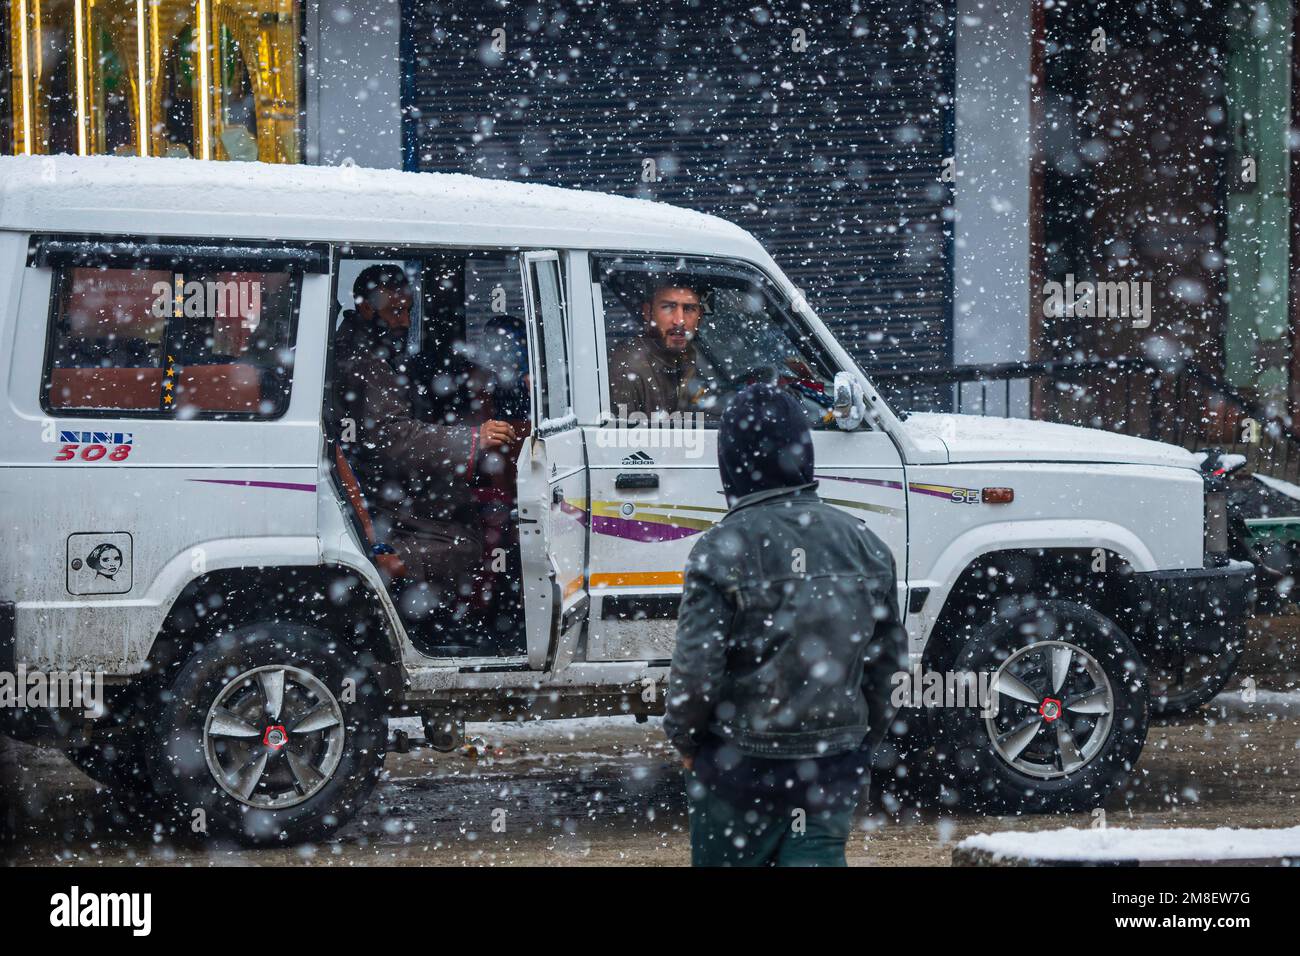 A cab driver waits for passengers amid ongoing heavy snowfall on the outskirts of Srinagar. At least two labourers killed on Thursday after an avalanche hits high-altitude area in central Kashmir's Sonamarg. Most parts of Kashmir received fresh snowfall that leading to the closure of Kashmir capital's main highway that connects disputed region with the rest of India. Meanwhile airport authorities suspended all flight operations till further notice due to continuous snowfall and low visibility. (Photo by Faisal Bashir/SOPA Images/Sipa USA) Stock Photo